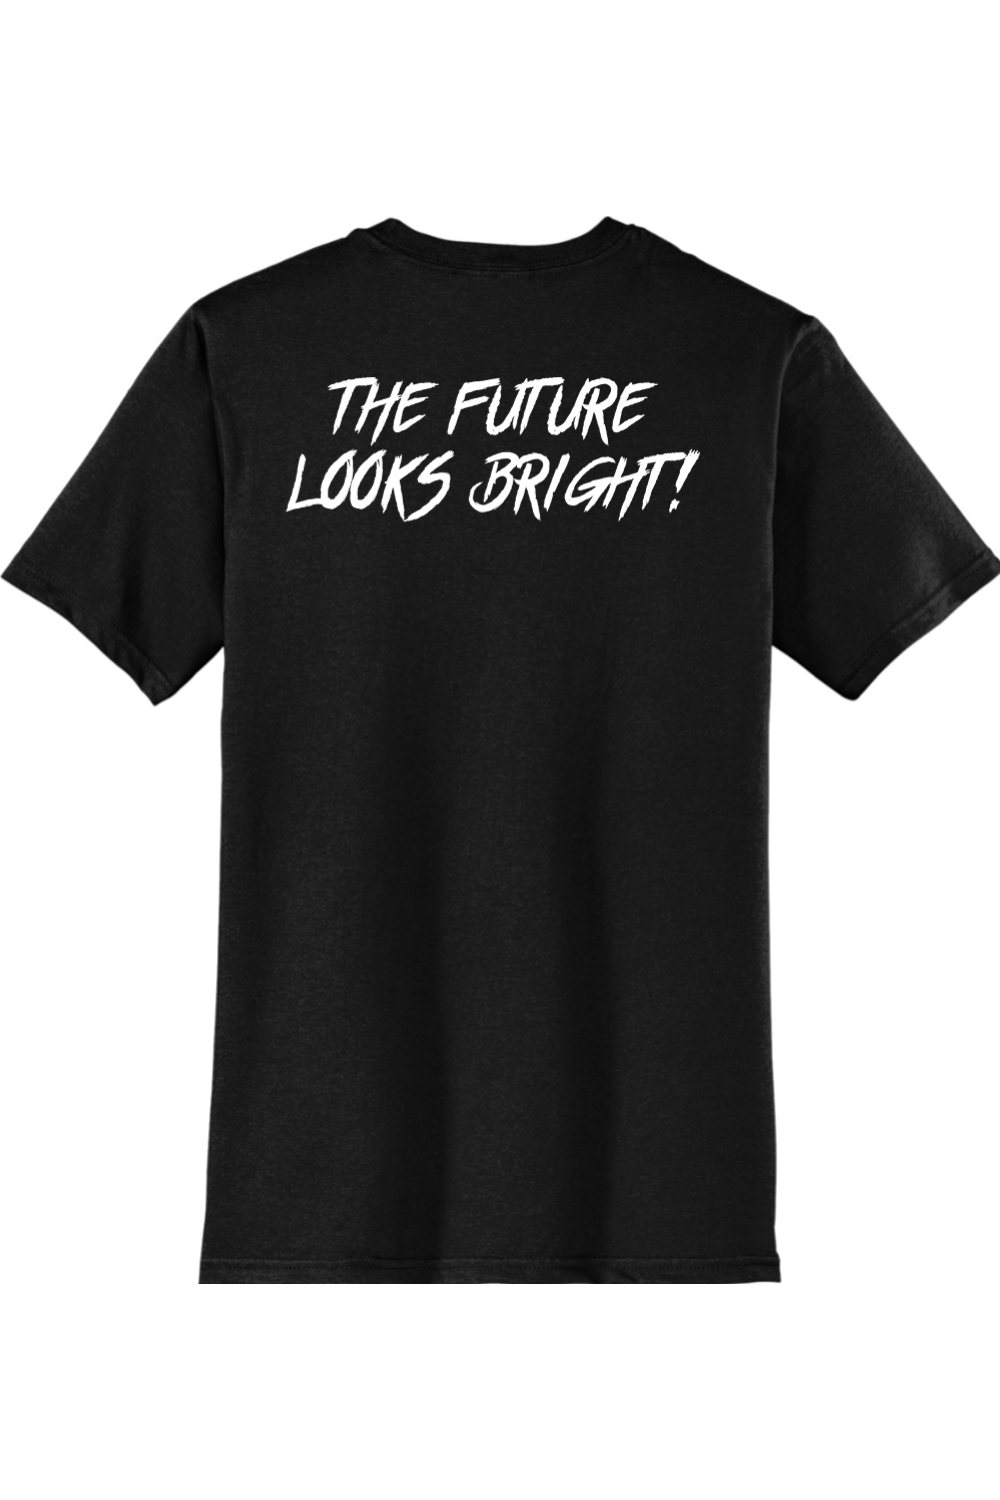 Rugged The FLB Tee - White Text